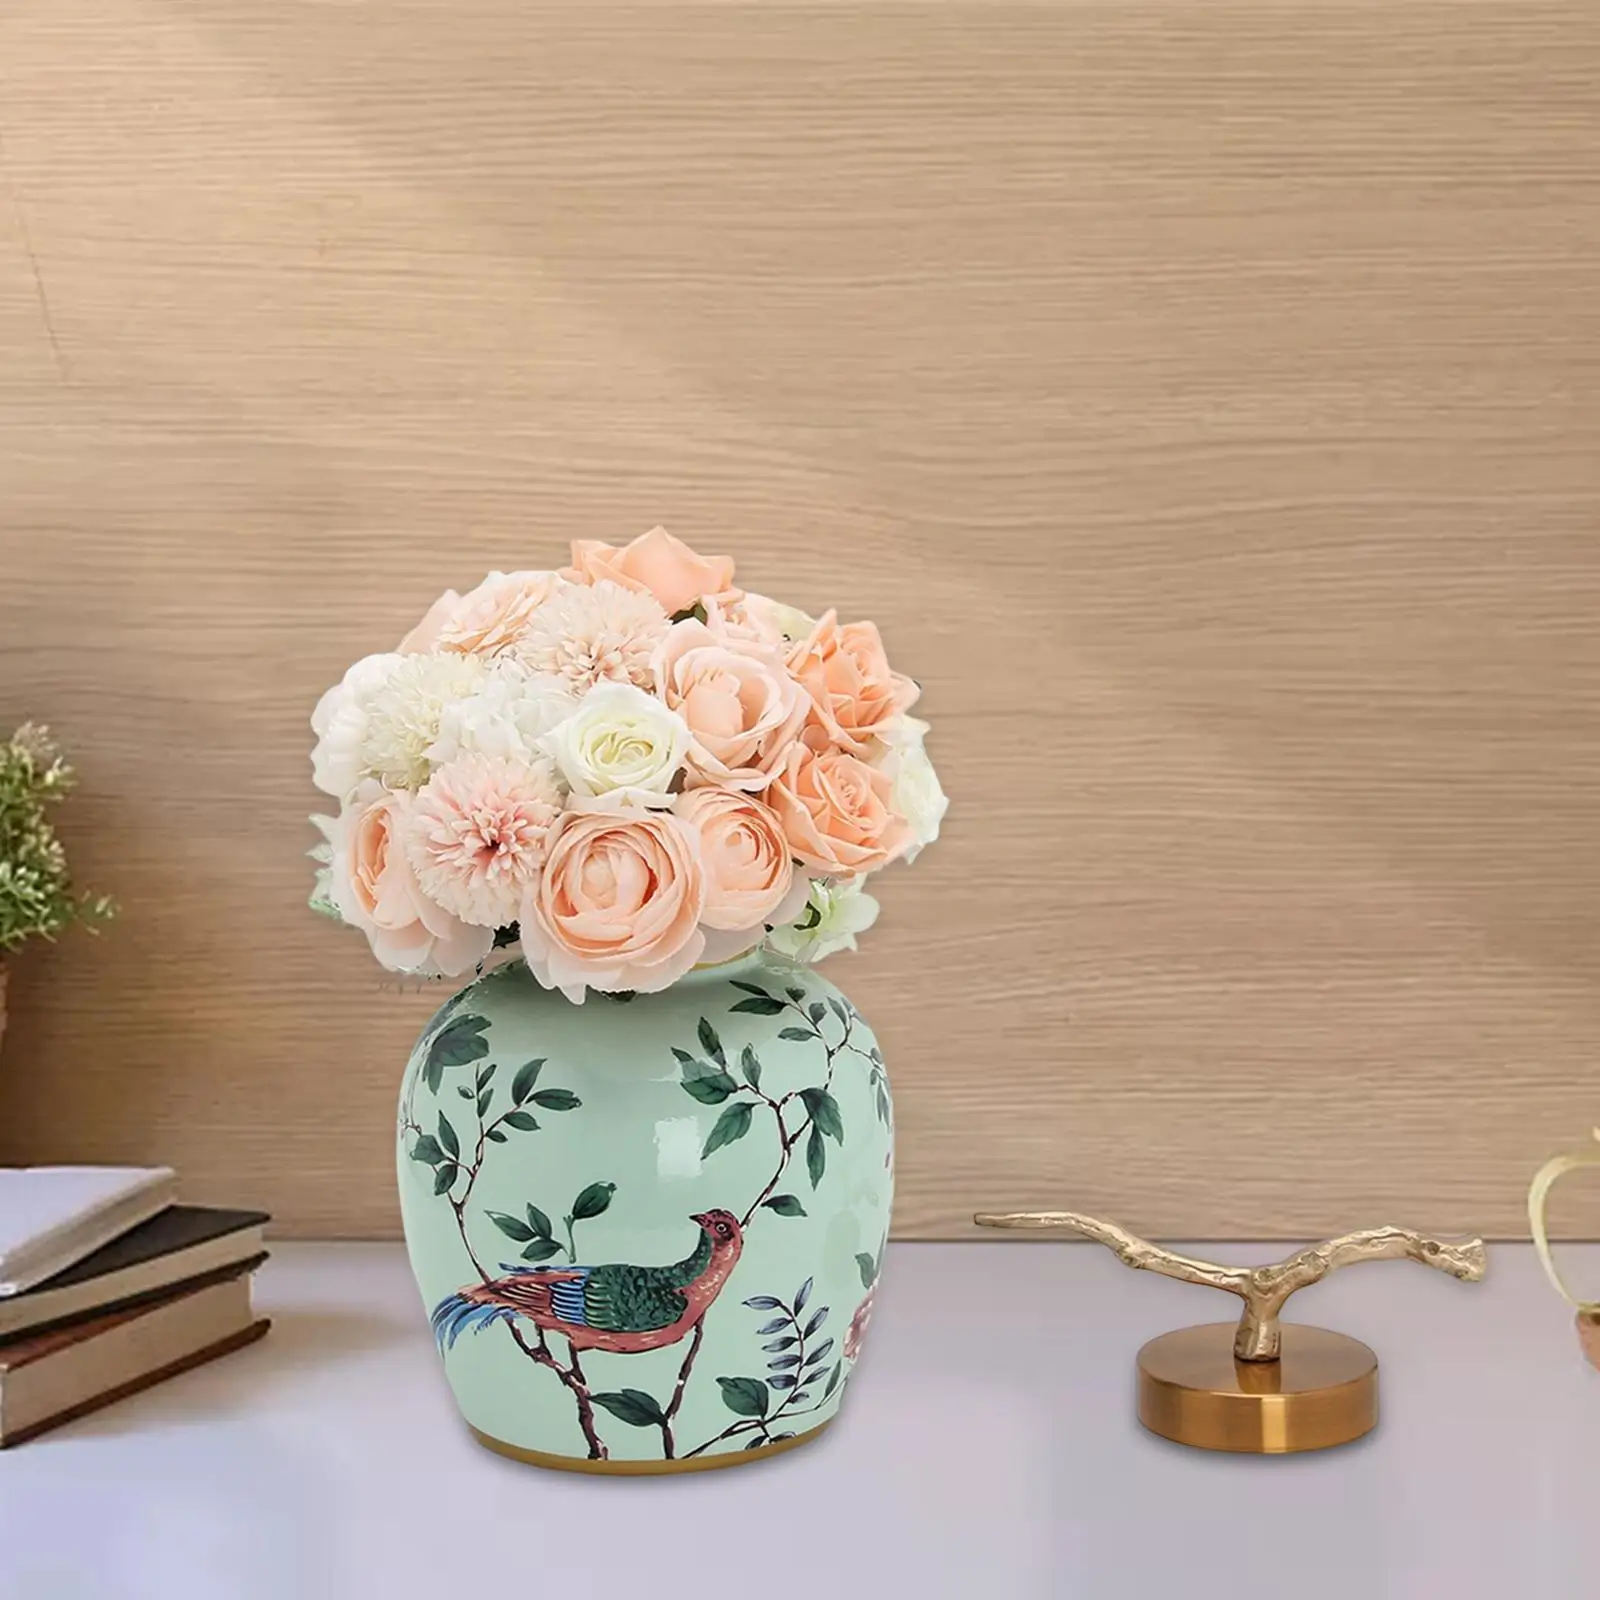 Oriental Ceramic Ginger Jar vase Gift Tea Storage Crafts with Lid Centerpiece for Office Wedding Table Decoration Party